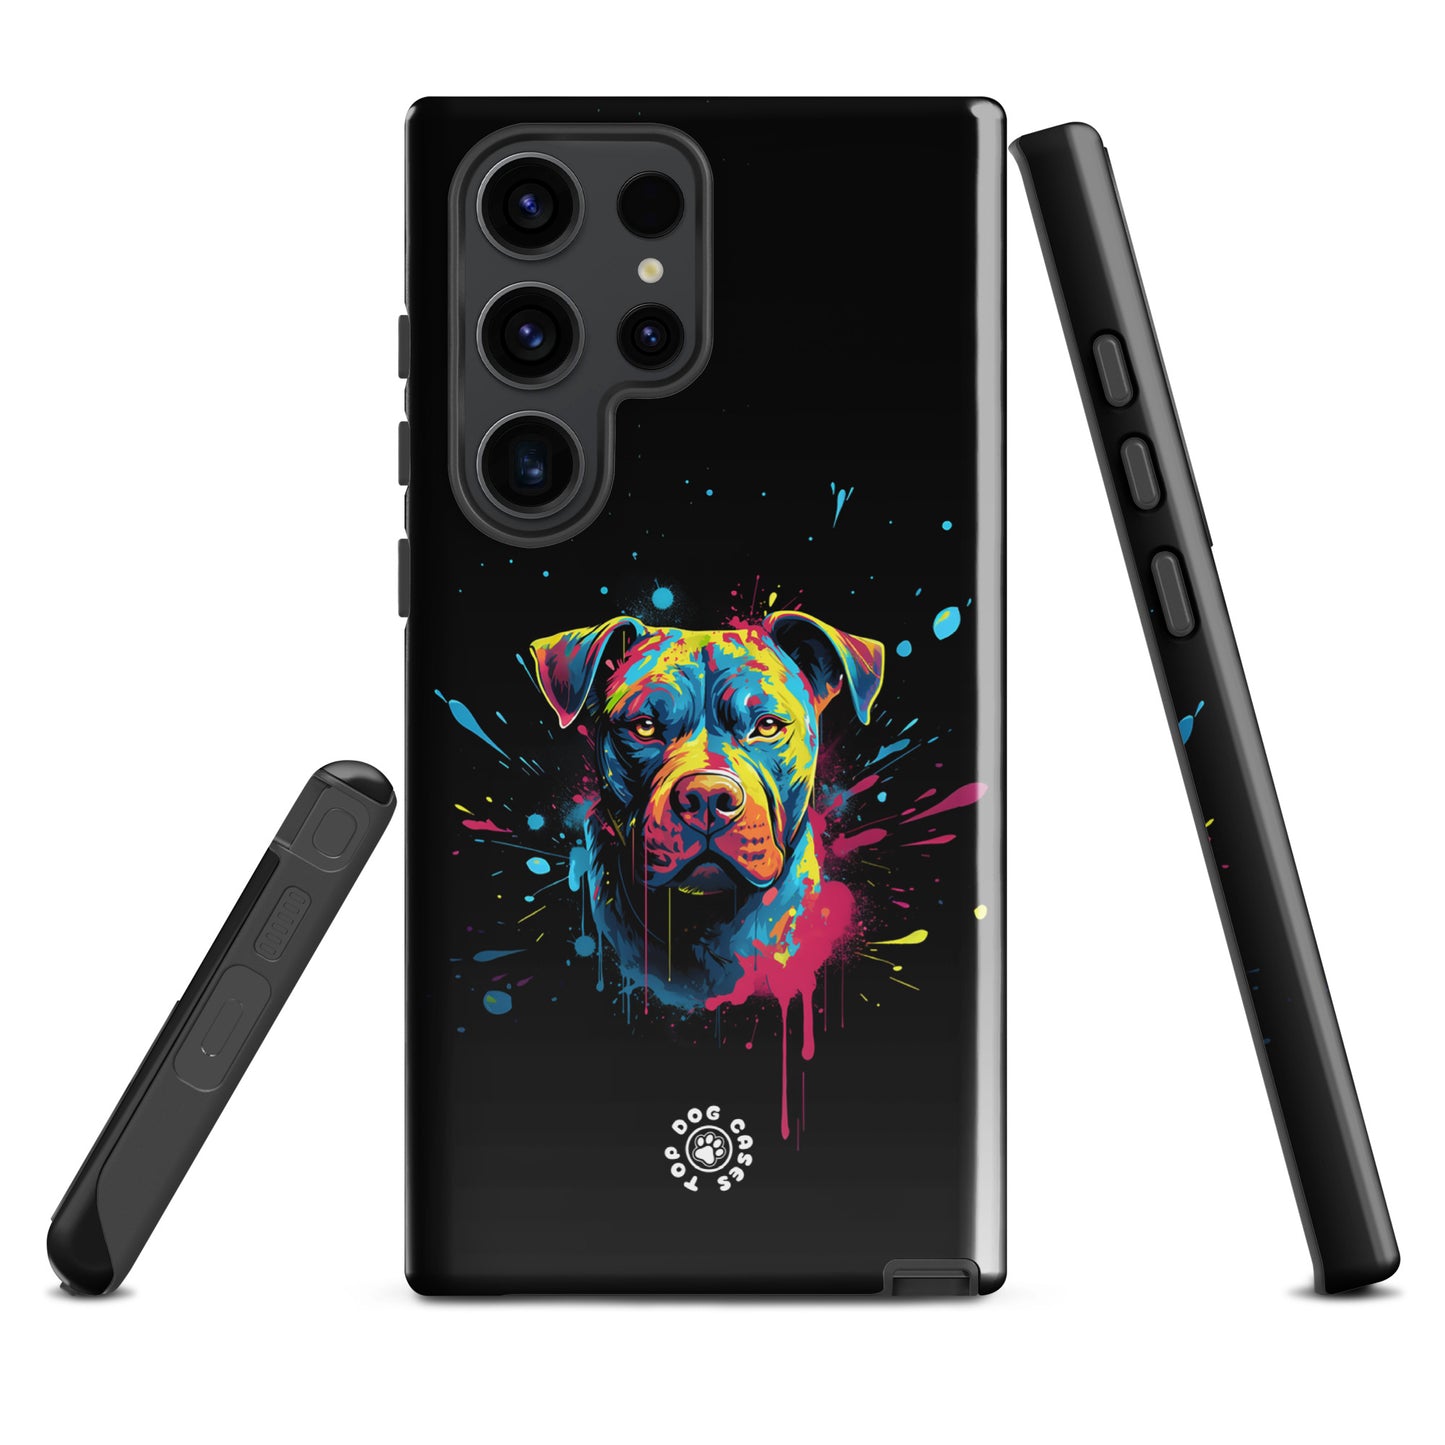 Pit Bull - Colorful Phone Case - Samsung - Top Dog Cases - #ColorfulPhoneCases, #DogPhoneCase, #Pit Bull, #Samsung, #SamsungGalaxy, #SamsungGalaxyCase, #SamsungGalaxyS10, #SamsungGalaxyS20, #SamsungGalaxyS21, #SamsungGalaxyS22, #SamsungGalaxyS22Ultra, #SamsungGalaxyS23, #SamsungGalaxyS23Plus, #SamsungGalaxyS23Ultra, #SamsungPhoneCase, #ToughCase, SamsungGalaxyS20Plus, SamsungGalaxyS22Plus